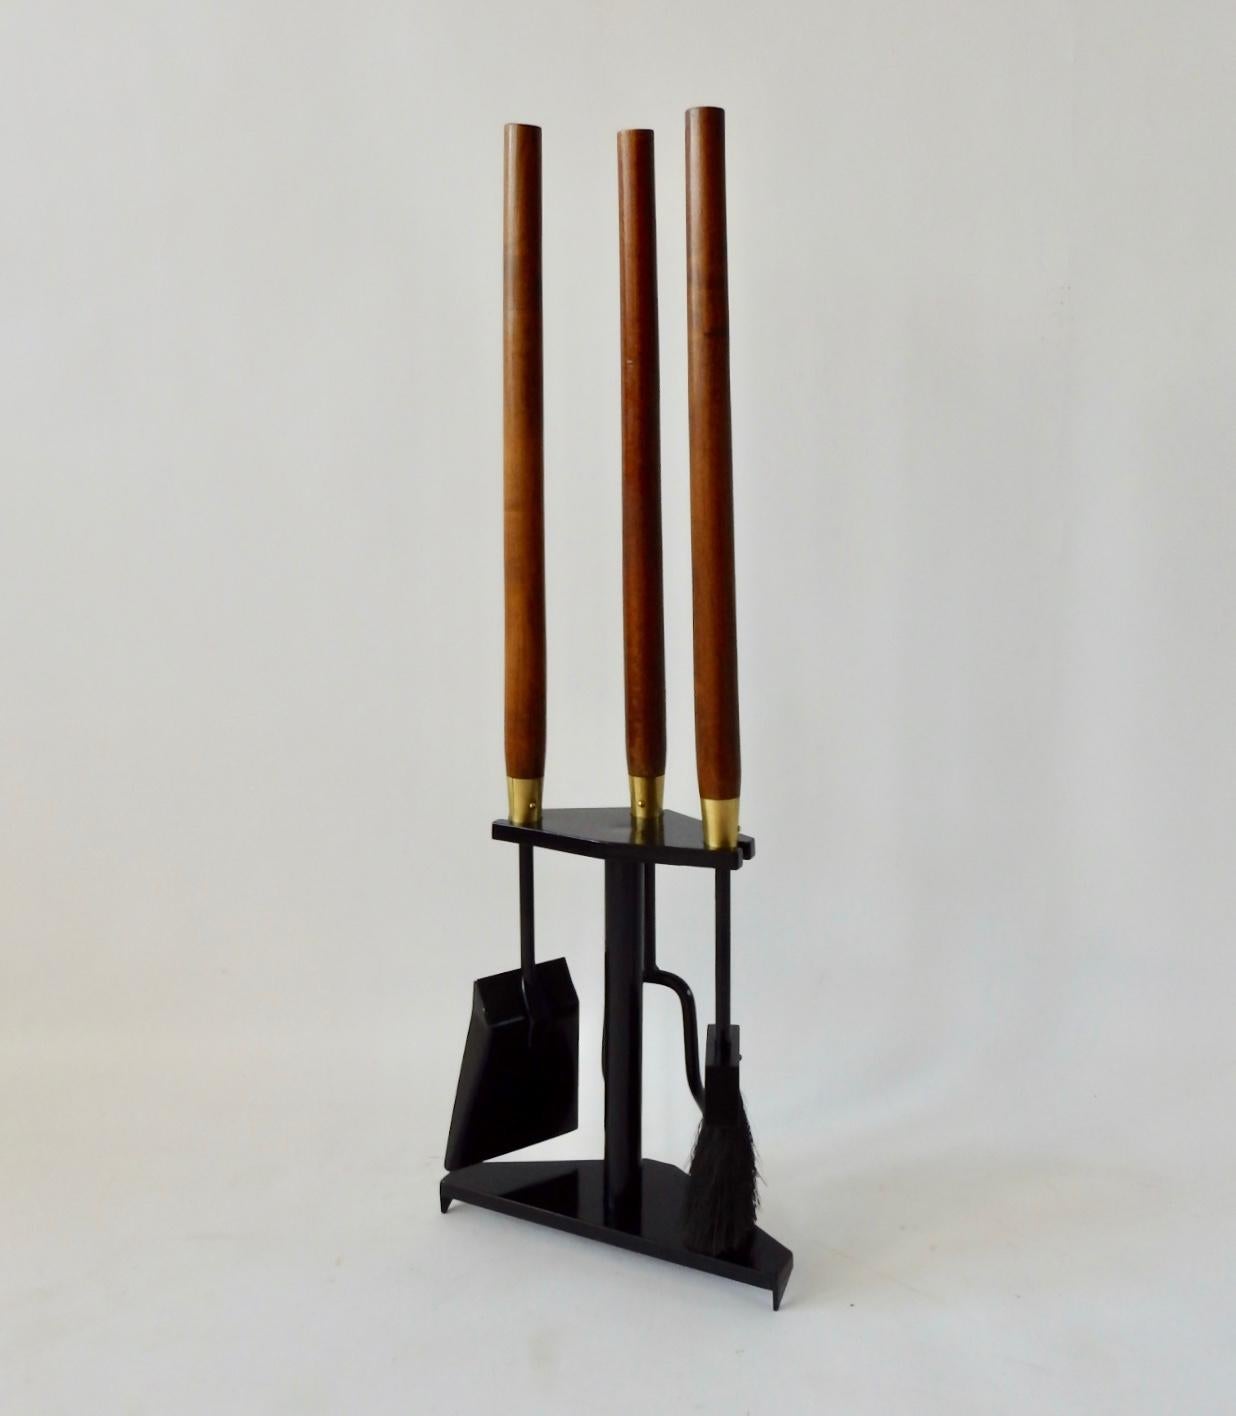 Lacquered Seymour Co. Wood Handle Fireplace Tools